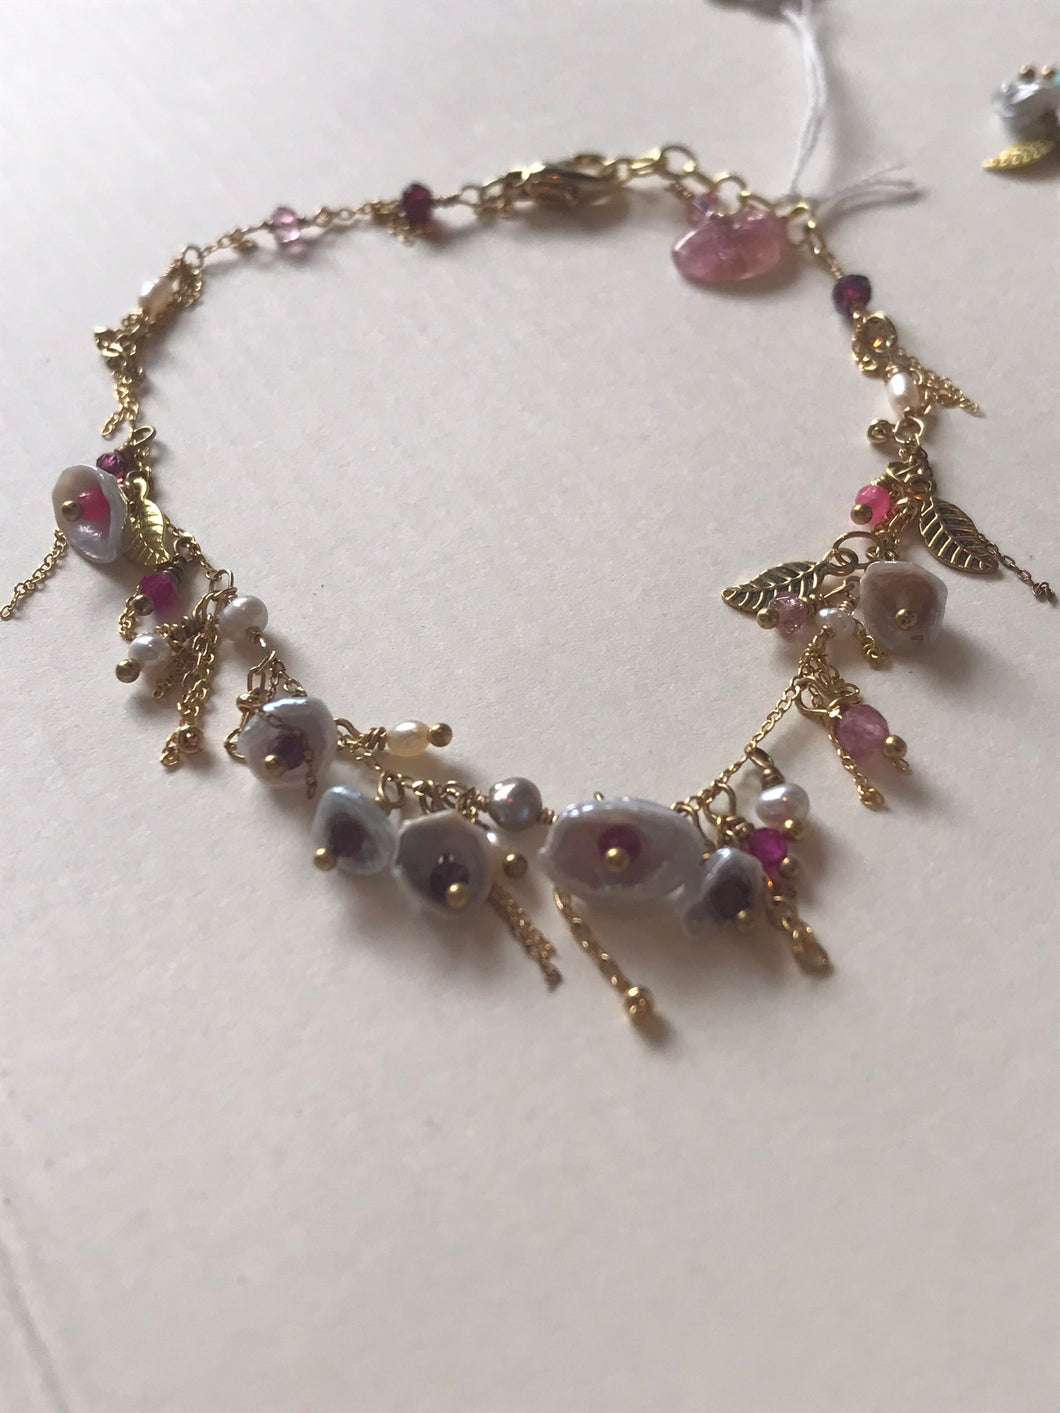 Dainty Whimsical Bracelet With Multi Charms